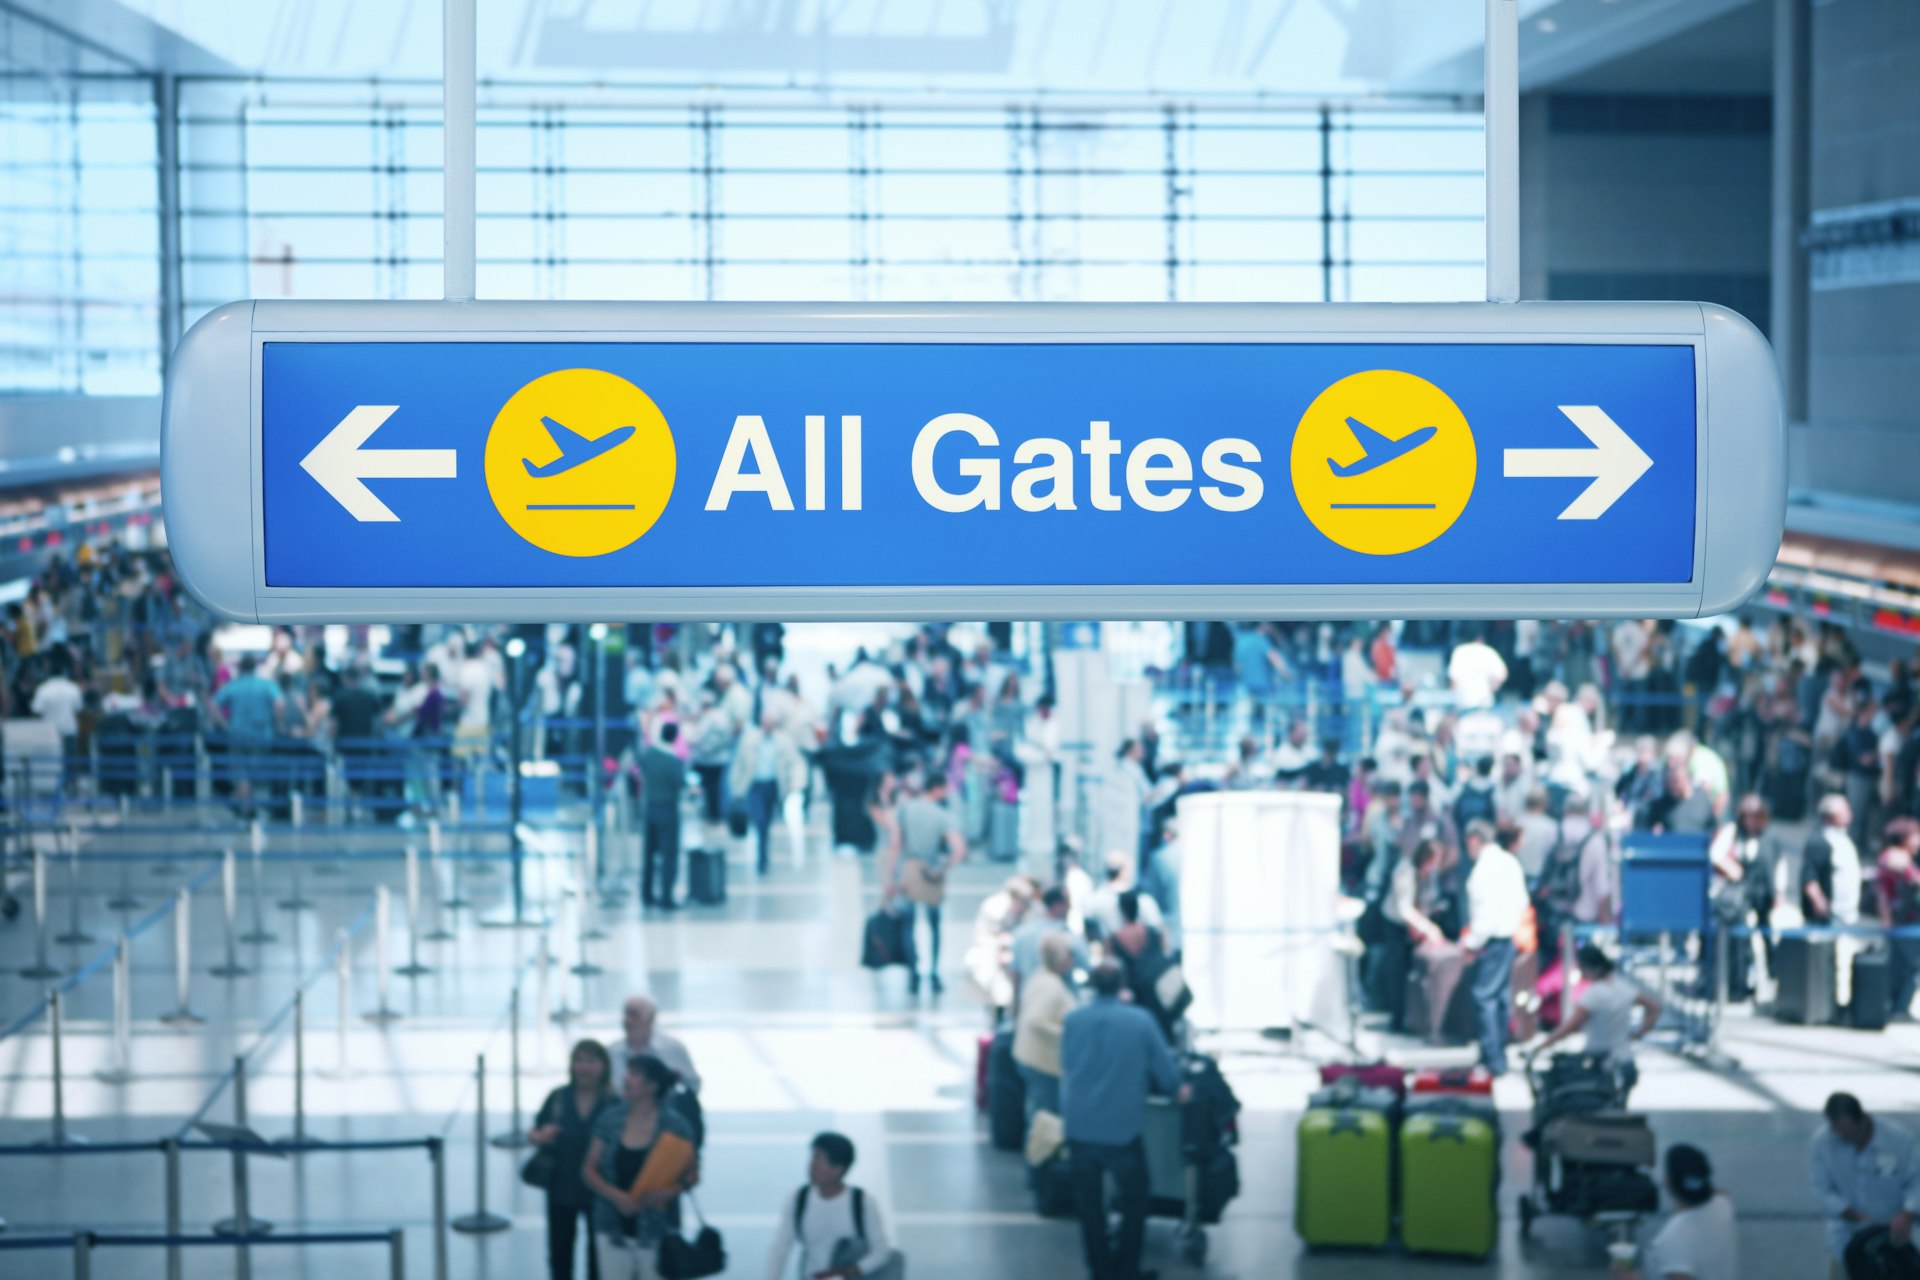 A large sign with "All Gates" written on it at an airport. Groups of people with luggage are lining up at desks in the concourse below the sign